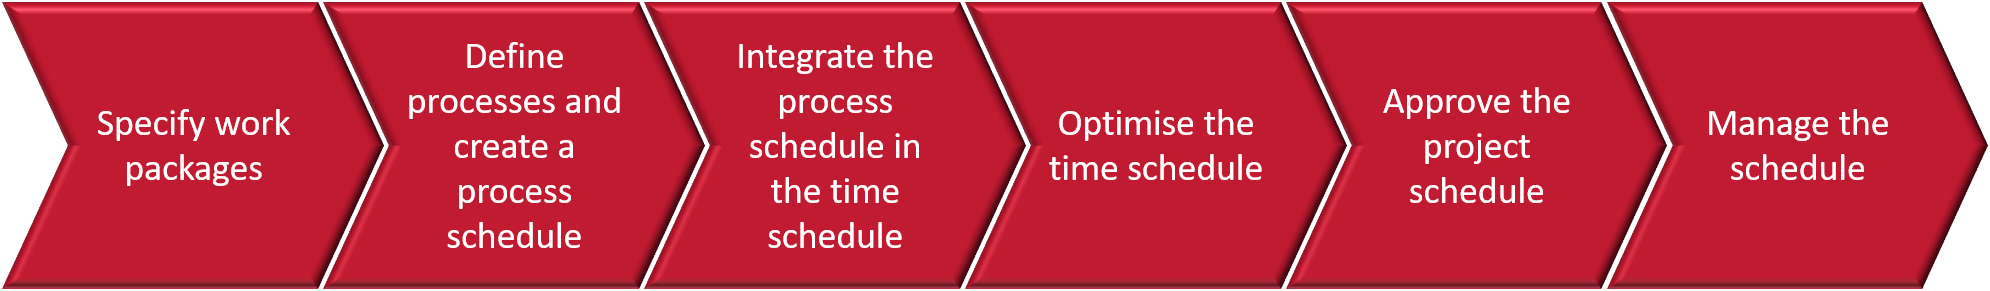 Six step process for time scheduling work packages.